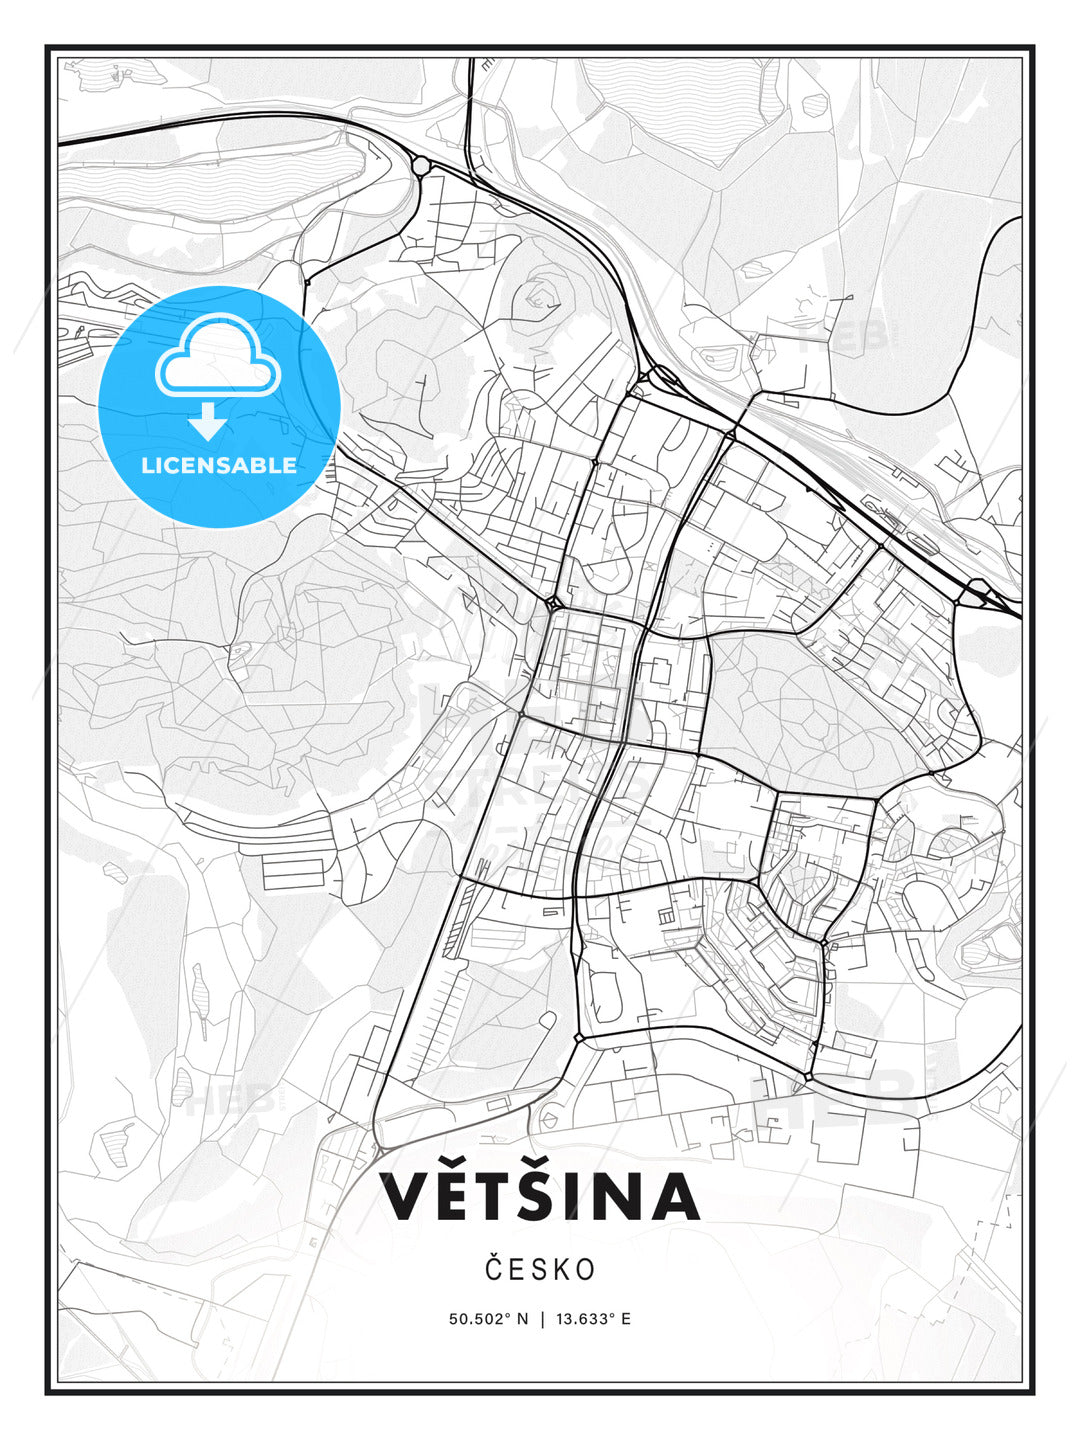 VĚTŠINA / Most, Czechia, Modern Print Template in Various Formats - HEBSTREITS Sketches